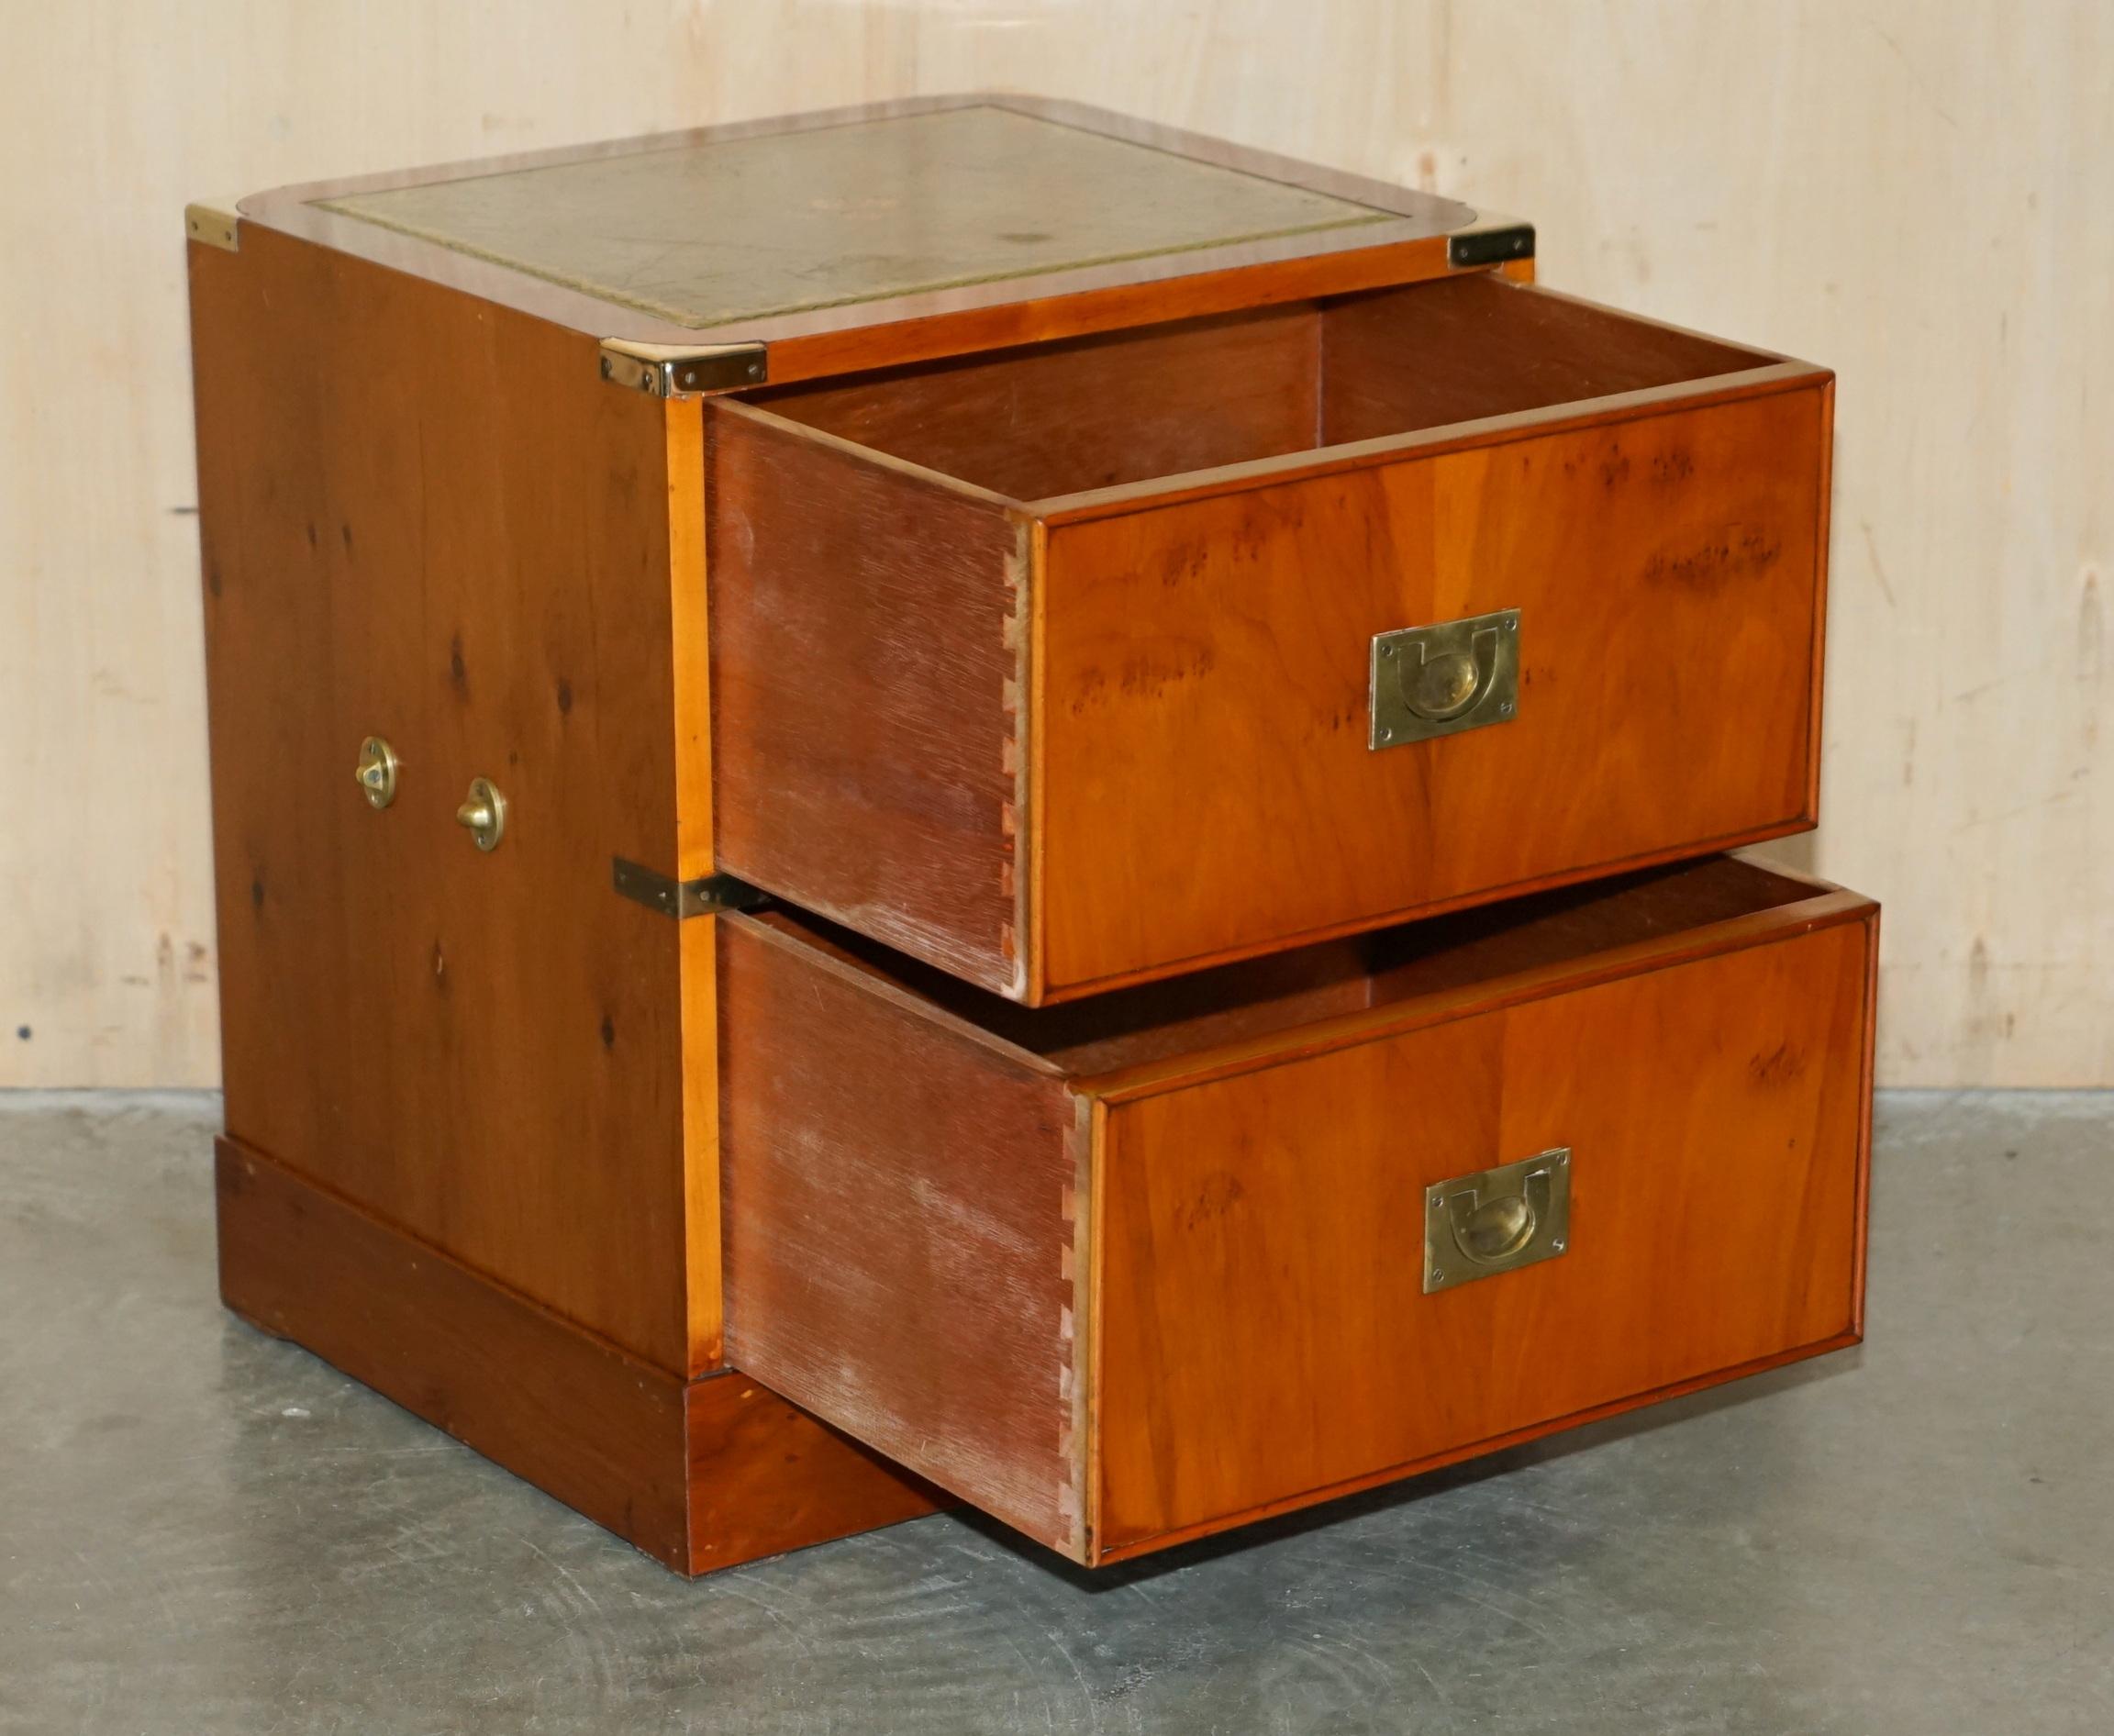 LOVELY PAiR OF BURR YEW WOOD GREEN LEATHER MILITARY CAMPAIGN NIGHTSTAND DRAWERS im Angebot 8